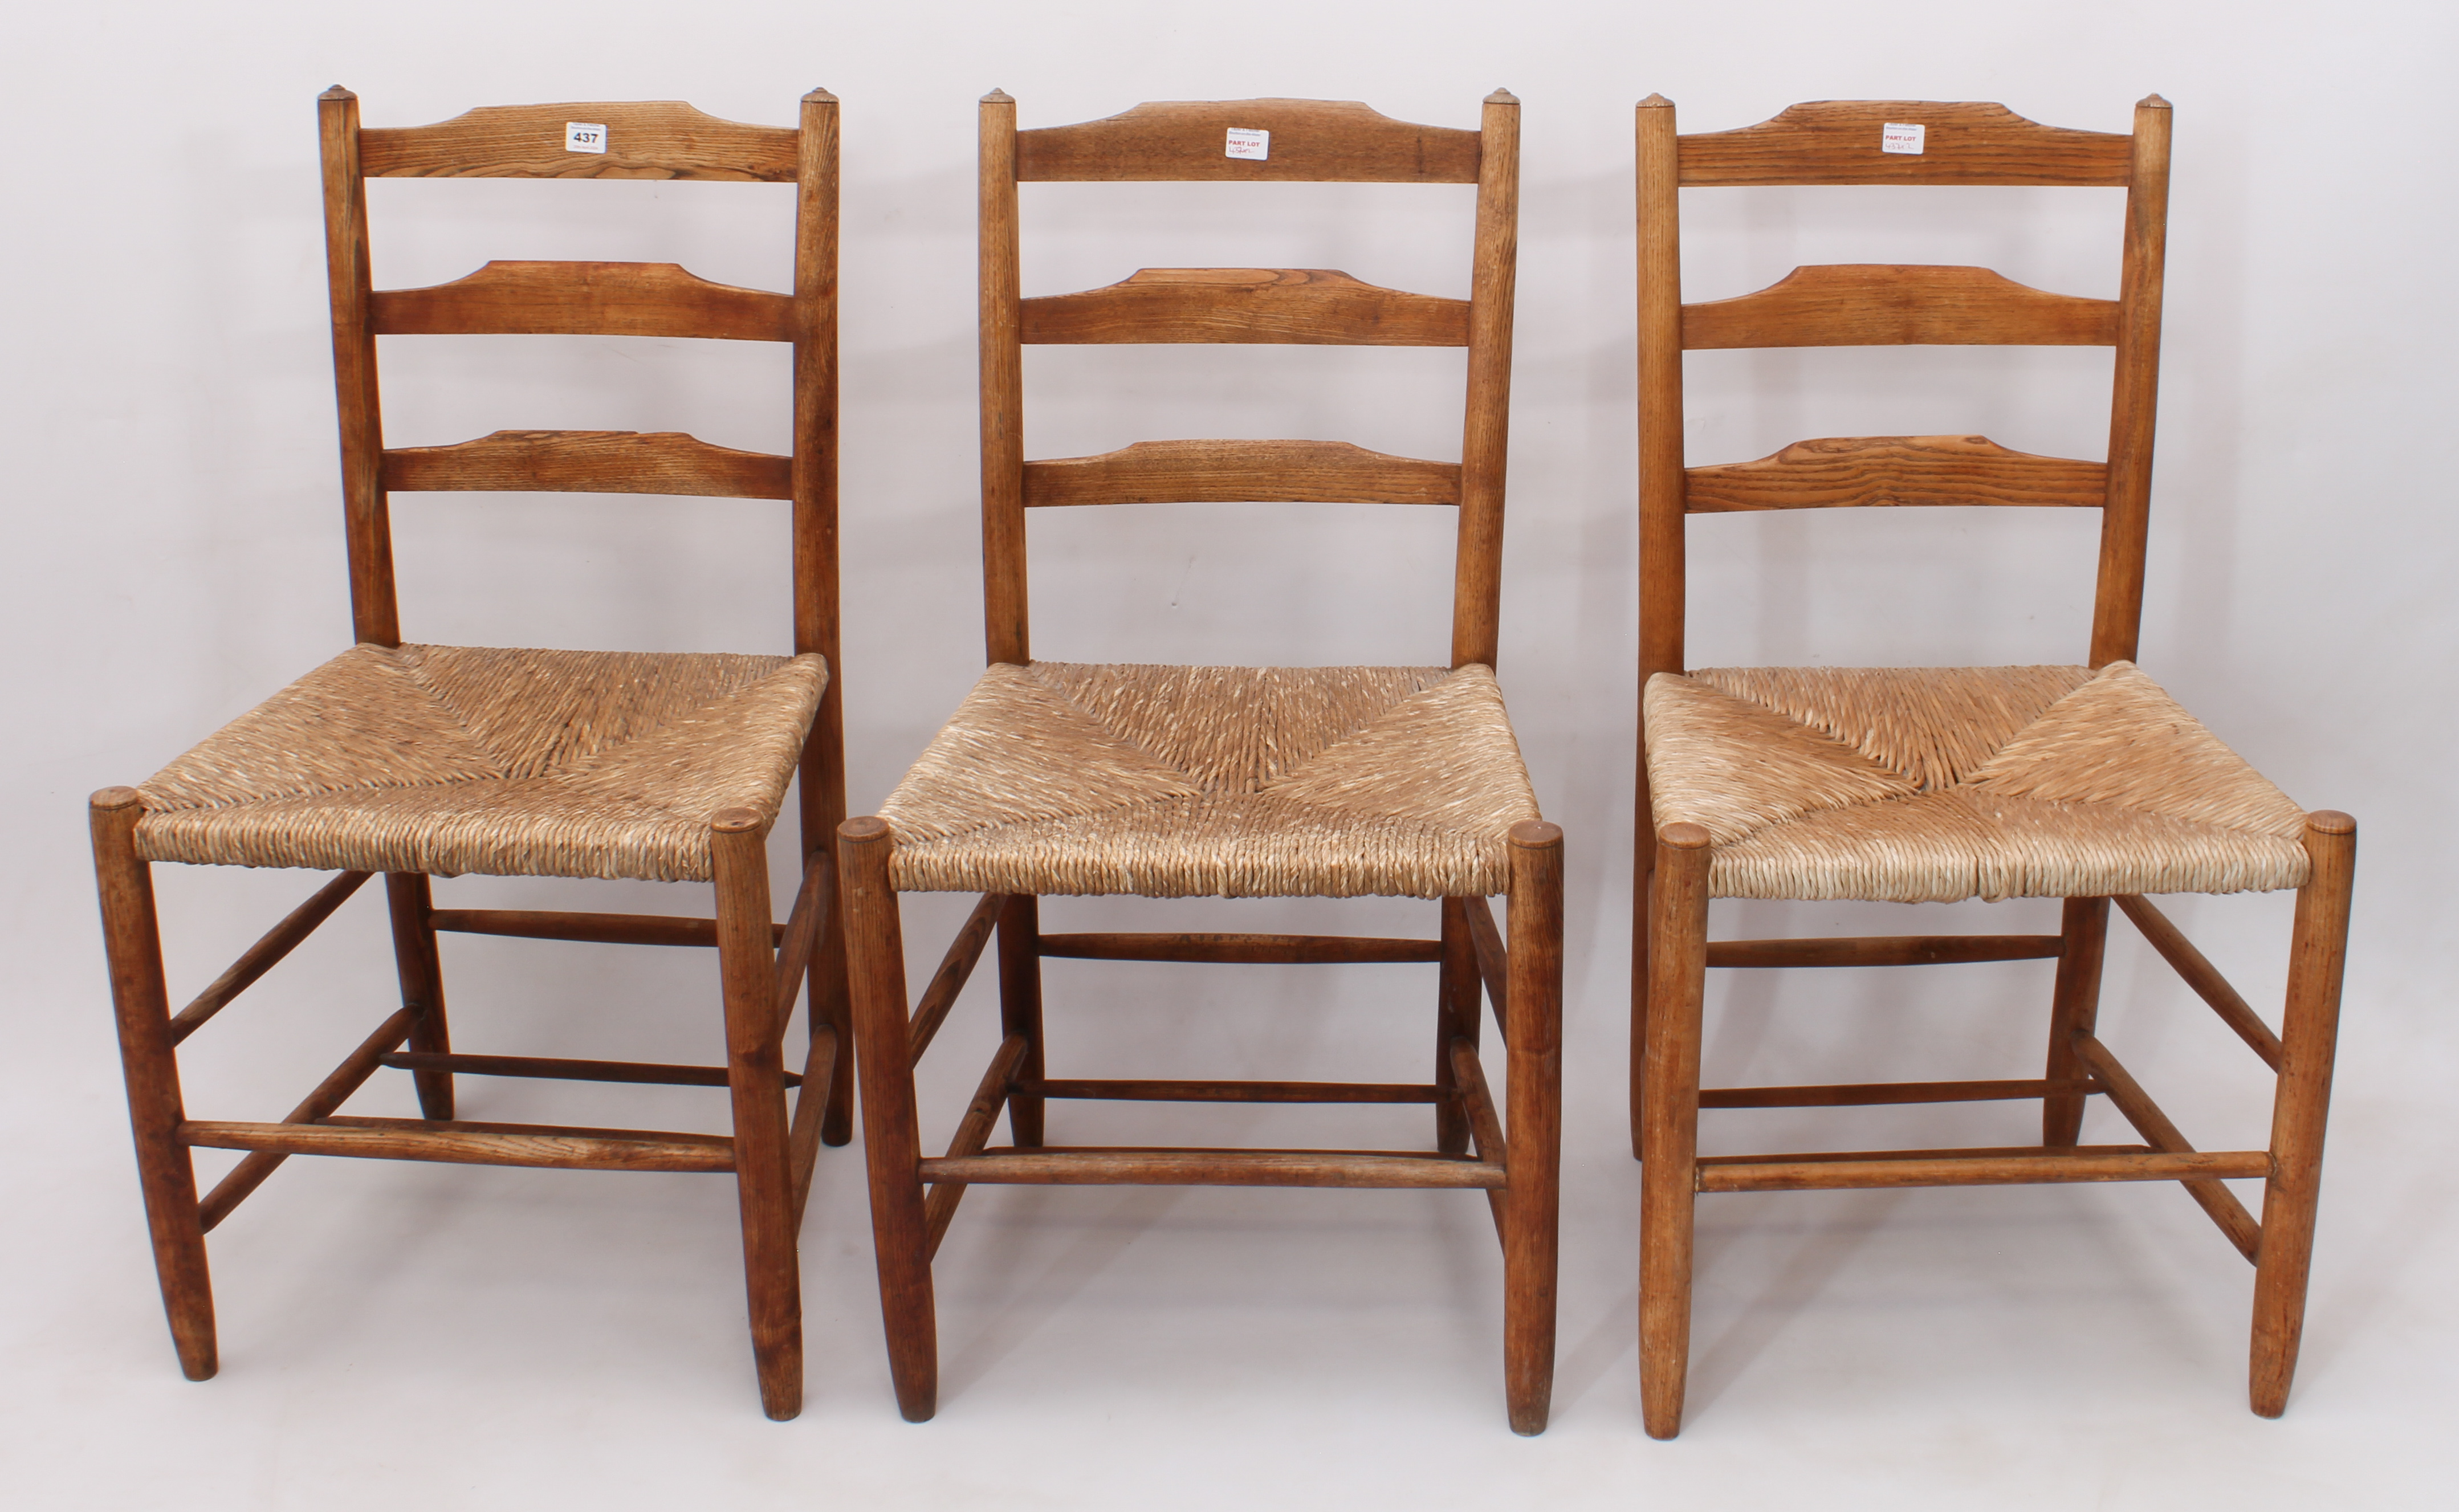 Three Cotswold School 19th century ash and elm ladderback chairs in the style of Philip Clissett -